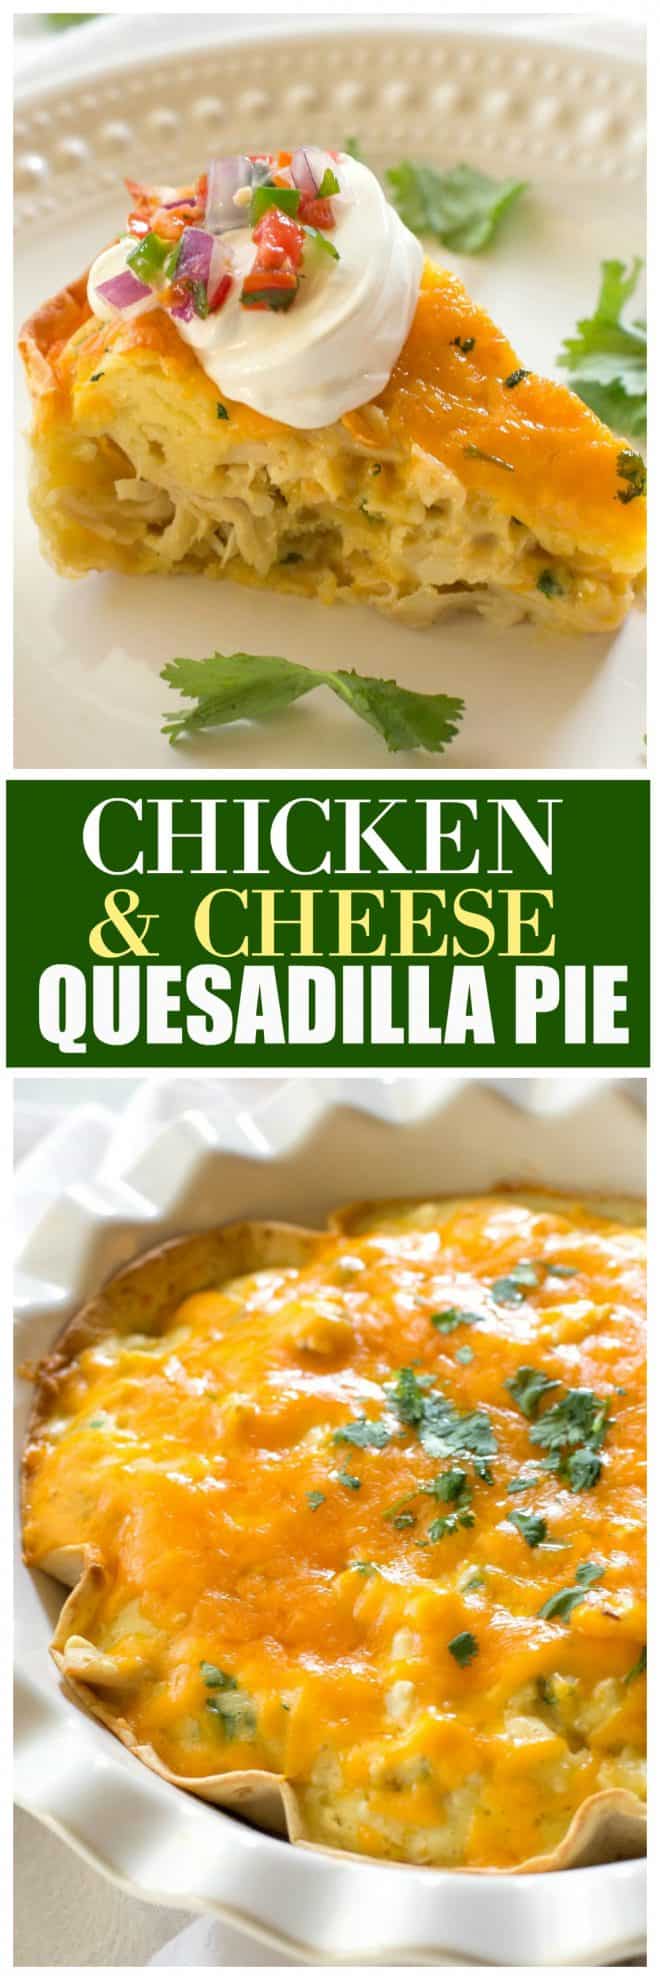 Chicken and Cheese Quesadilla Pie